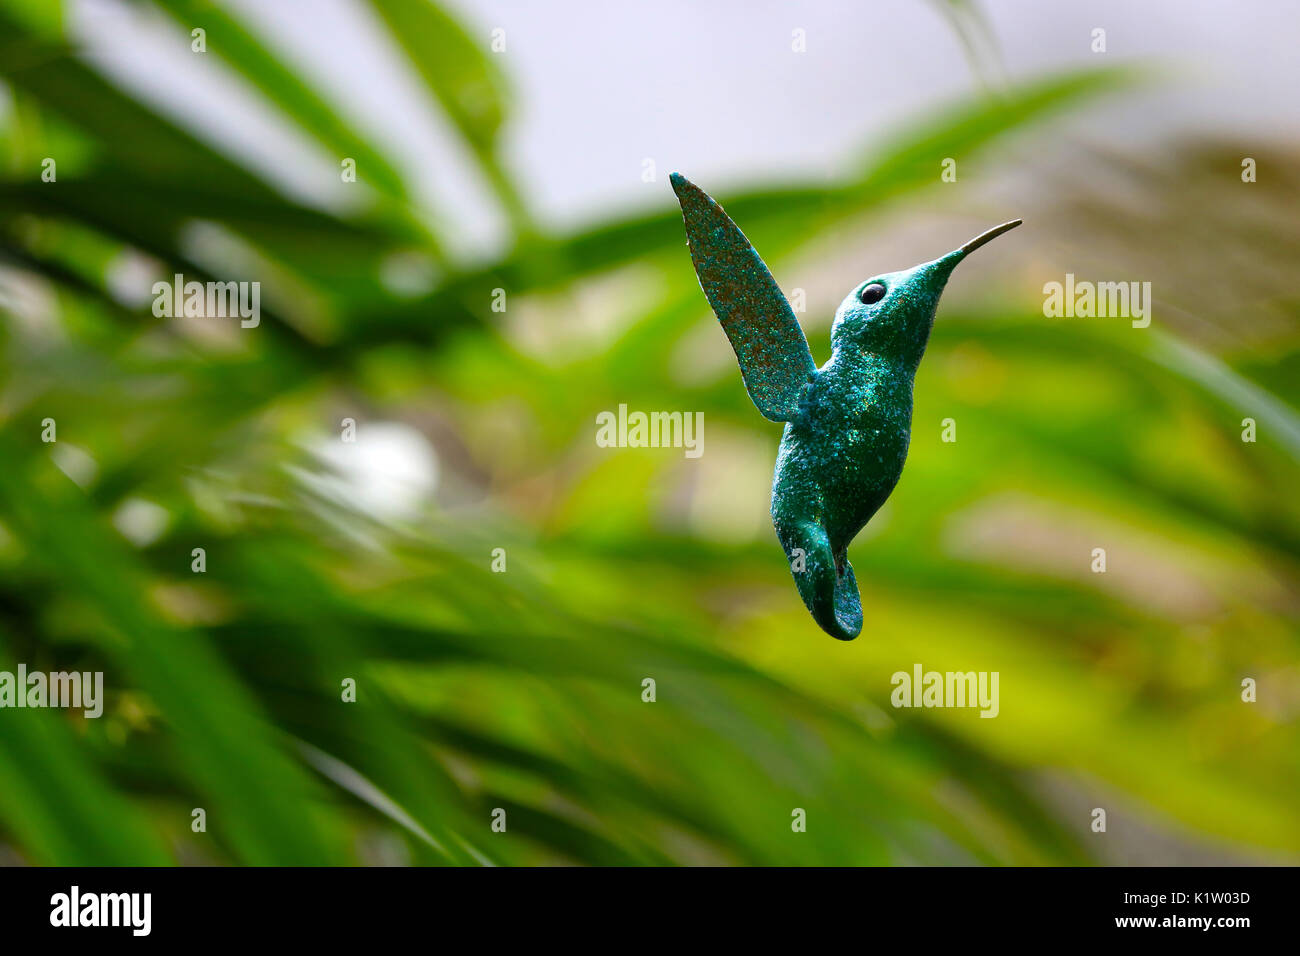 glittering green artificial fake hummingbird hovering in front of green leaves stems plants Stock Photo